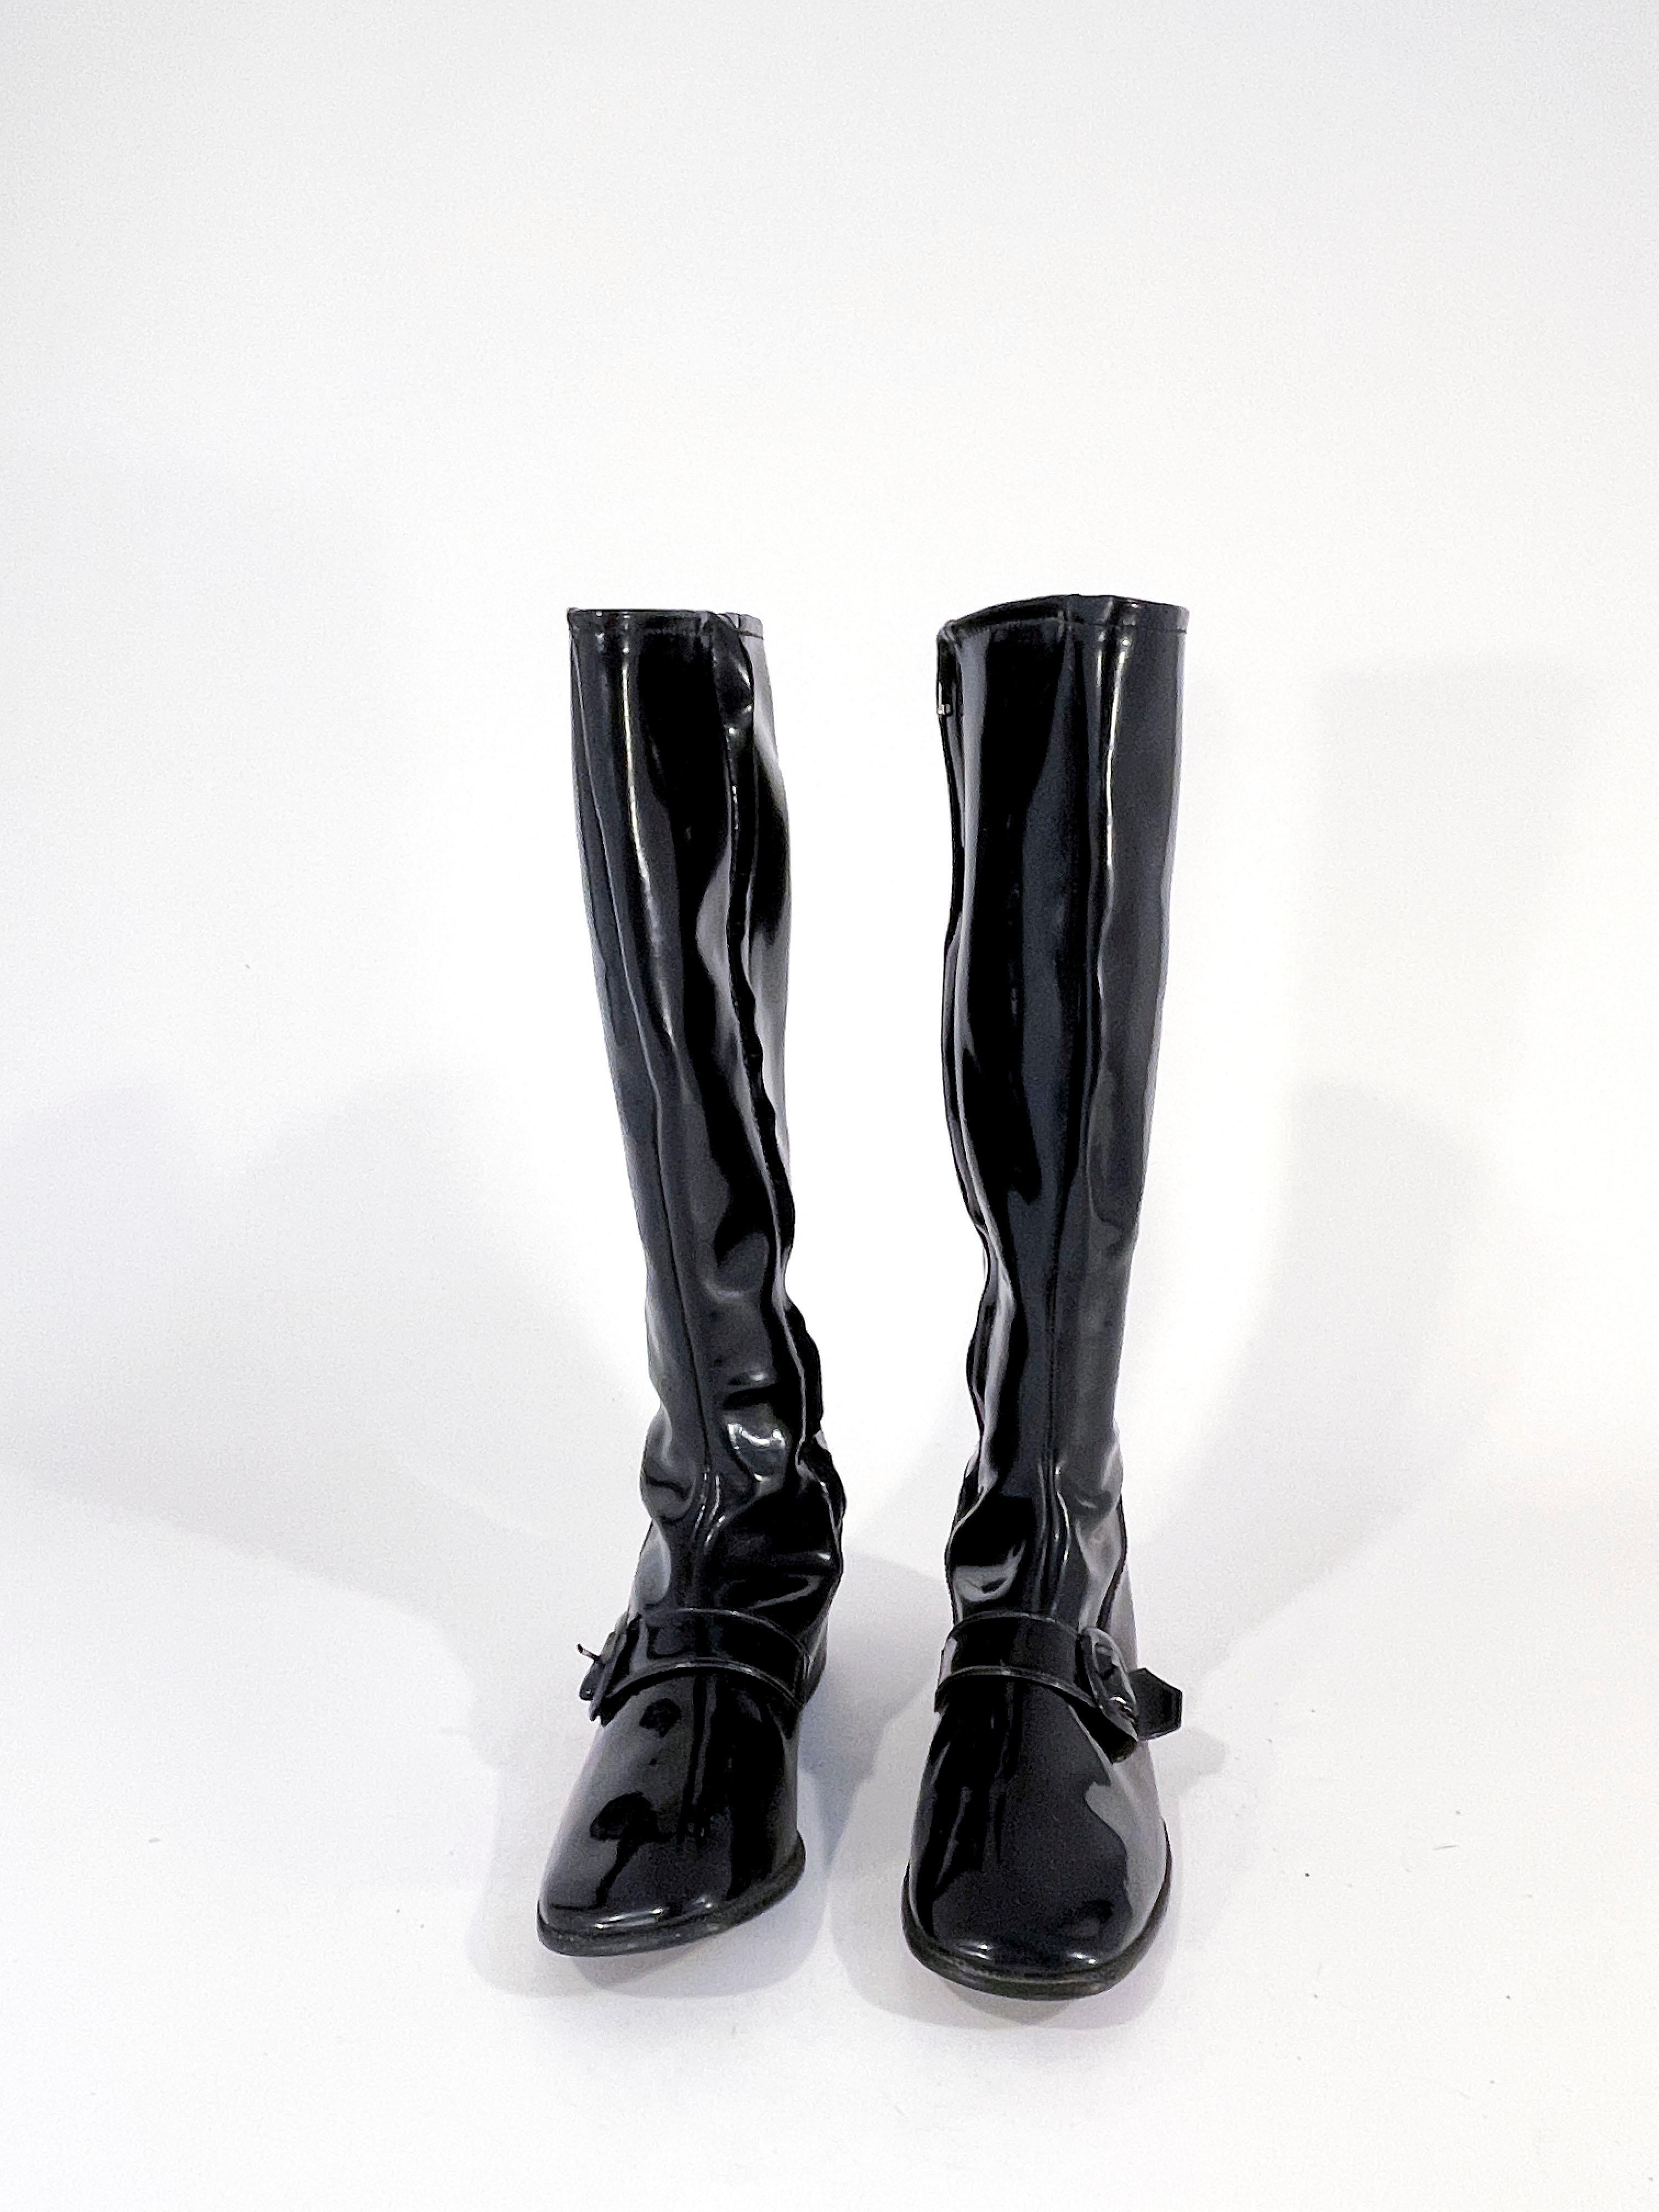 1970s shiny black vinyl knee-high go go boots with decorative strap and buckle over the bridge of the foot. The toe is squared off, the heel is stacked, and the interior sides have a metal zipper closure. 